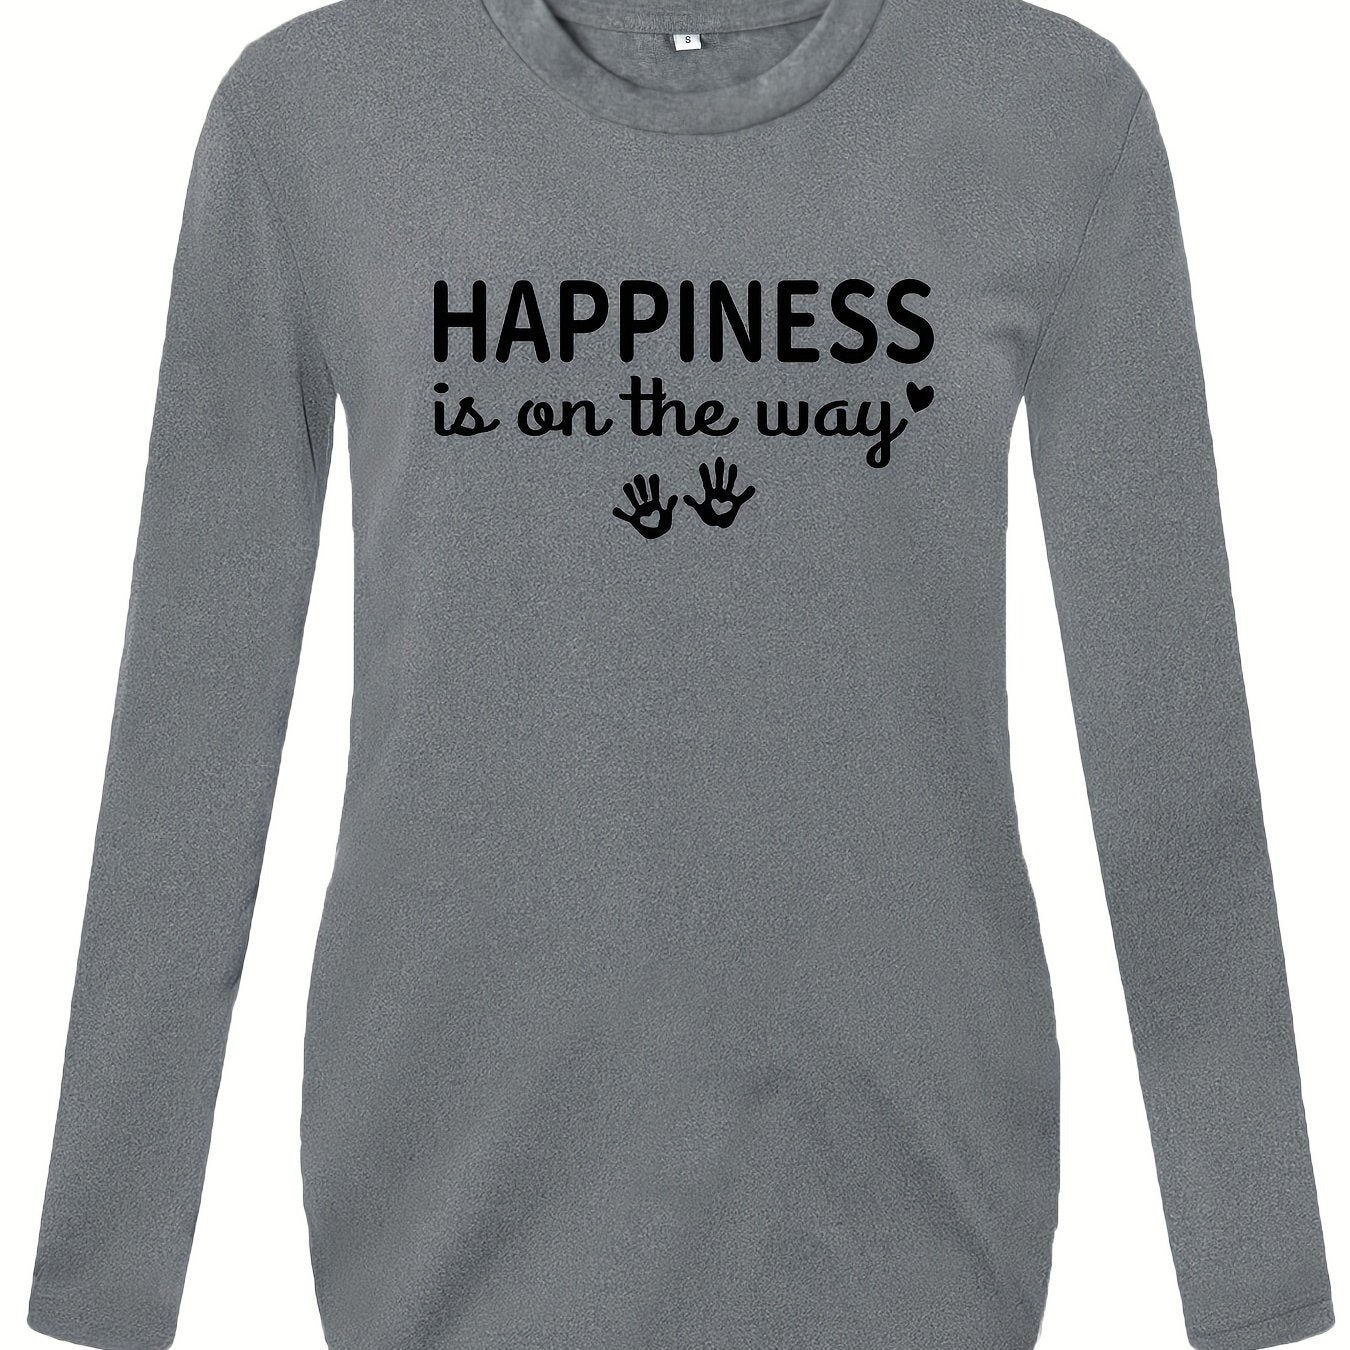 Happiness Is On The Way Women's Christian Maternity Pullover Sweatshirt claimedbygoddesigns